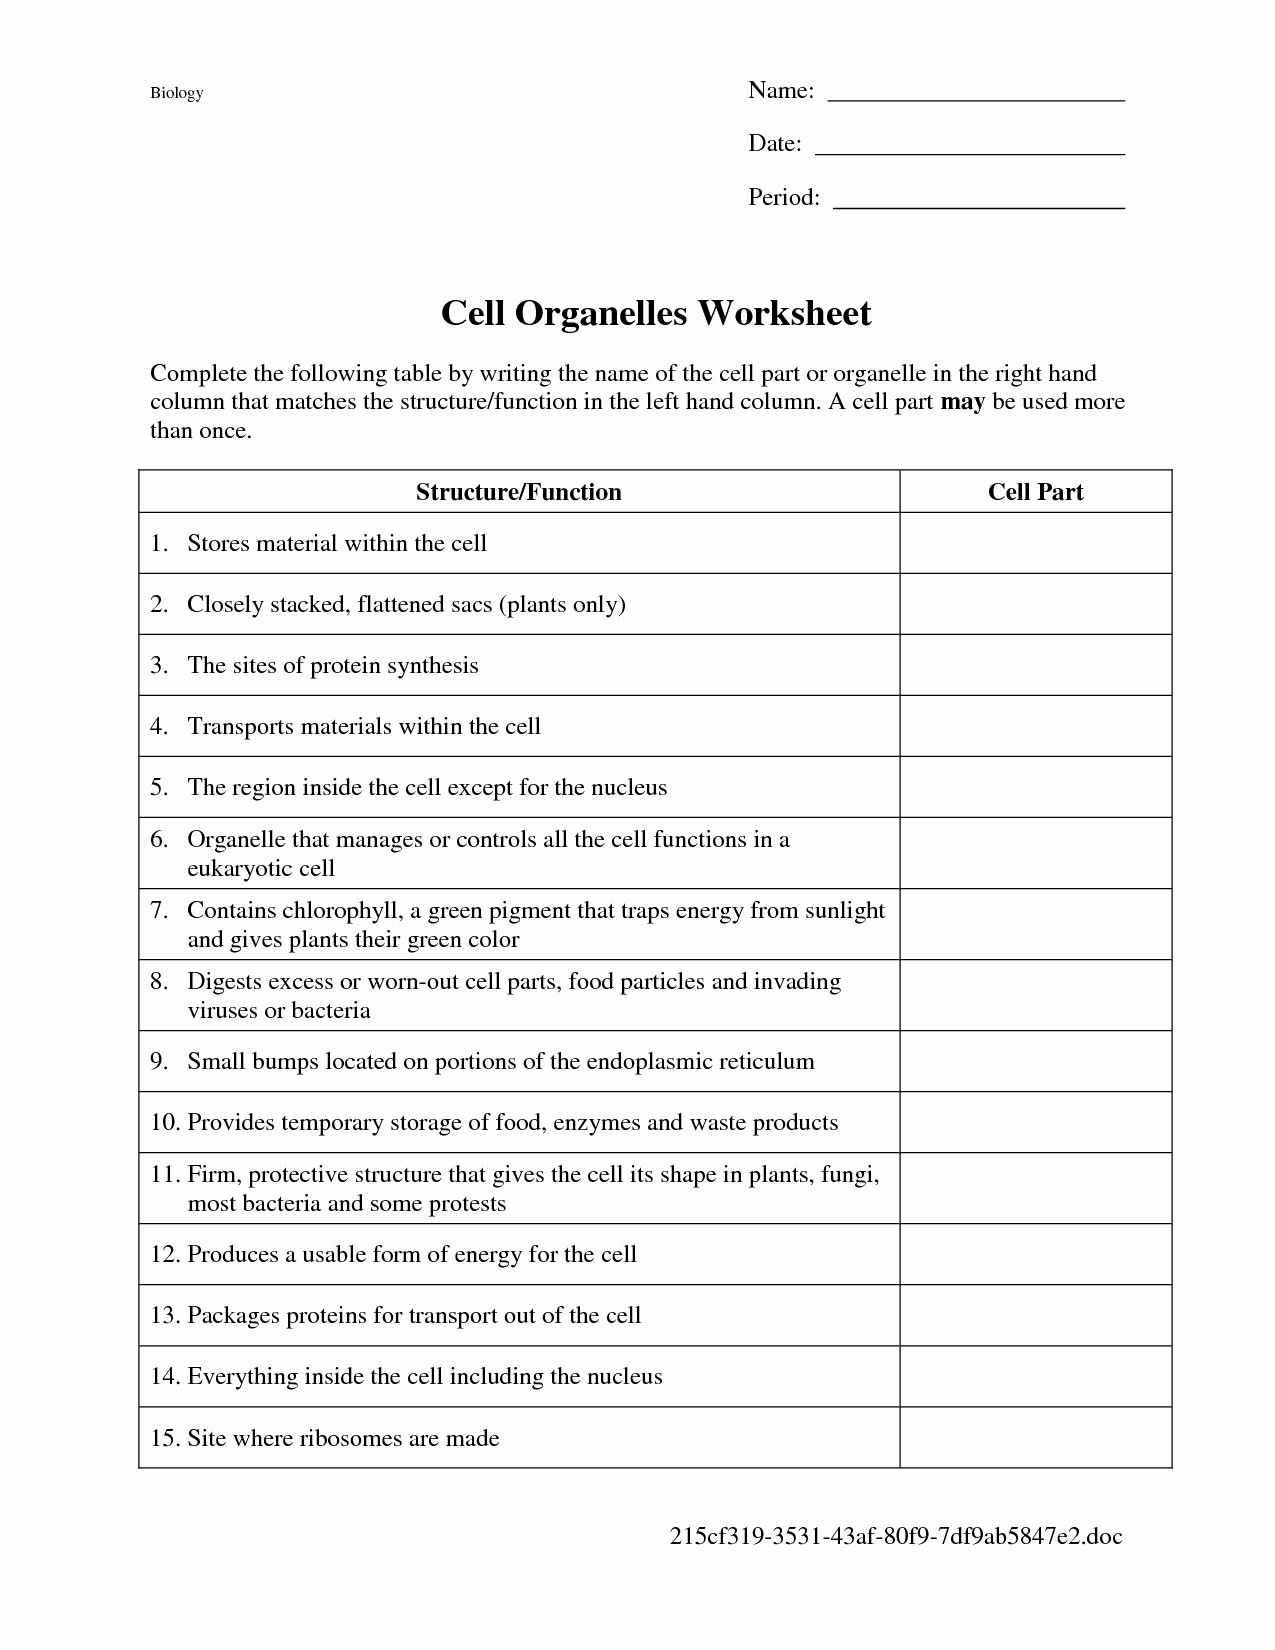 Cell organelles Worksheet Answers Cell organelles and Functions Worksheet